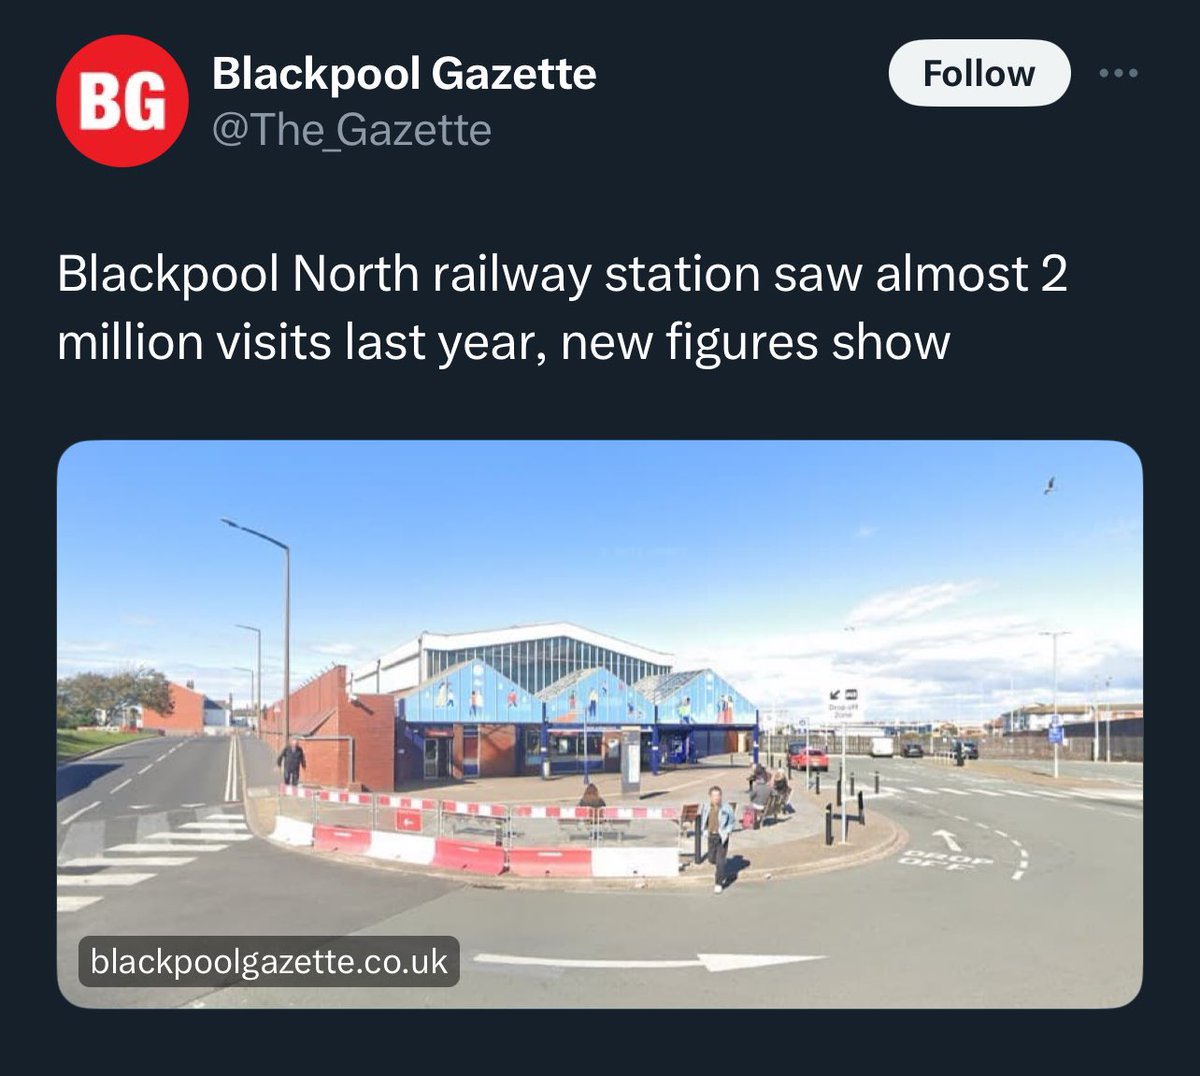 Whereas this year, 2 million almost visited Blackpool North railway station #BusReplacement